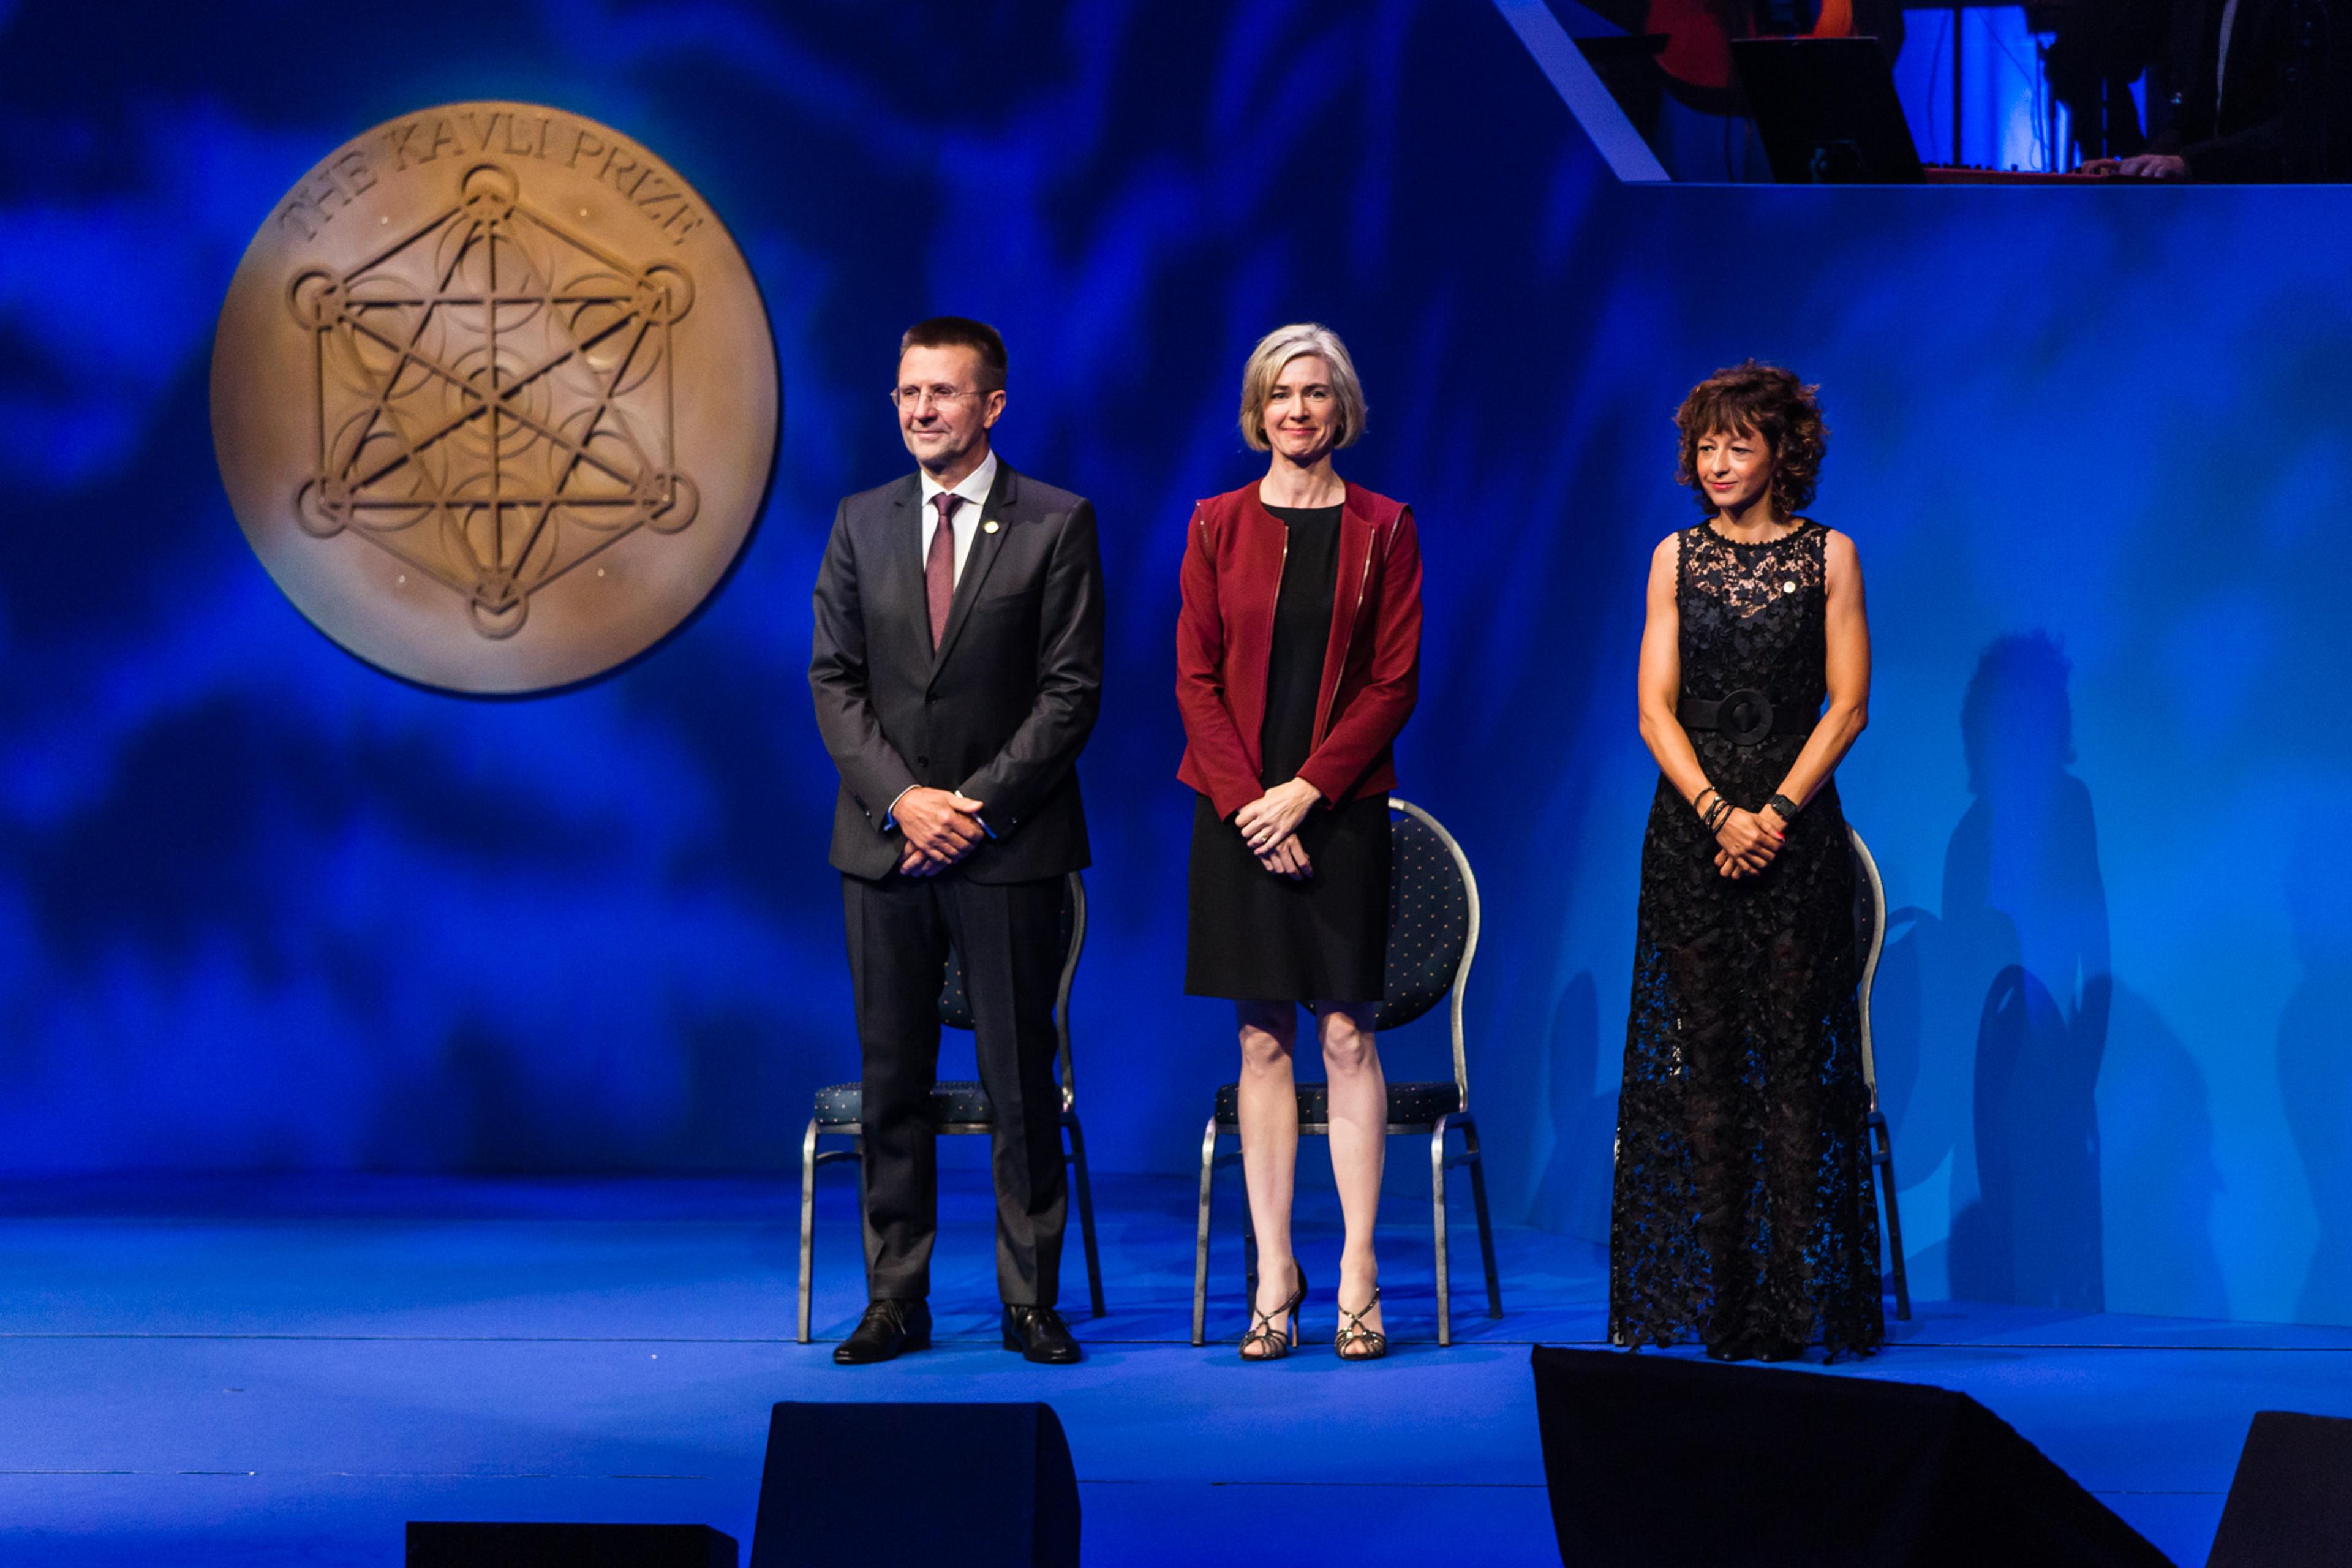 The 2018 Kavli Prize nanoscience laureates on stage at Oslo Concert Hall. 